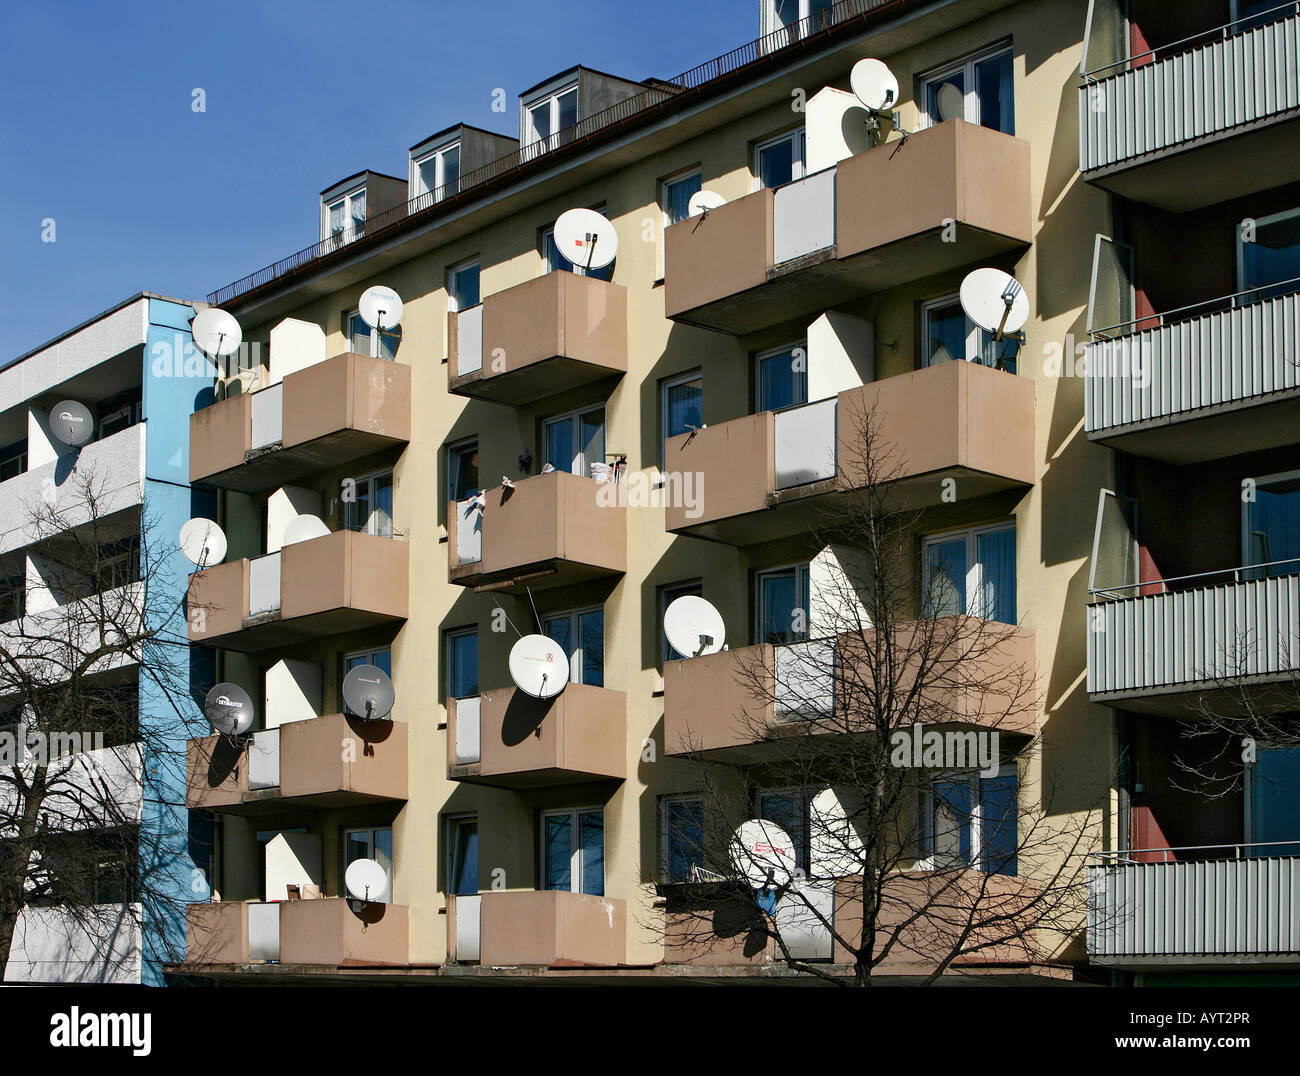 Satellite dishes mounted to the balconies of an apartment building Stock Photo